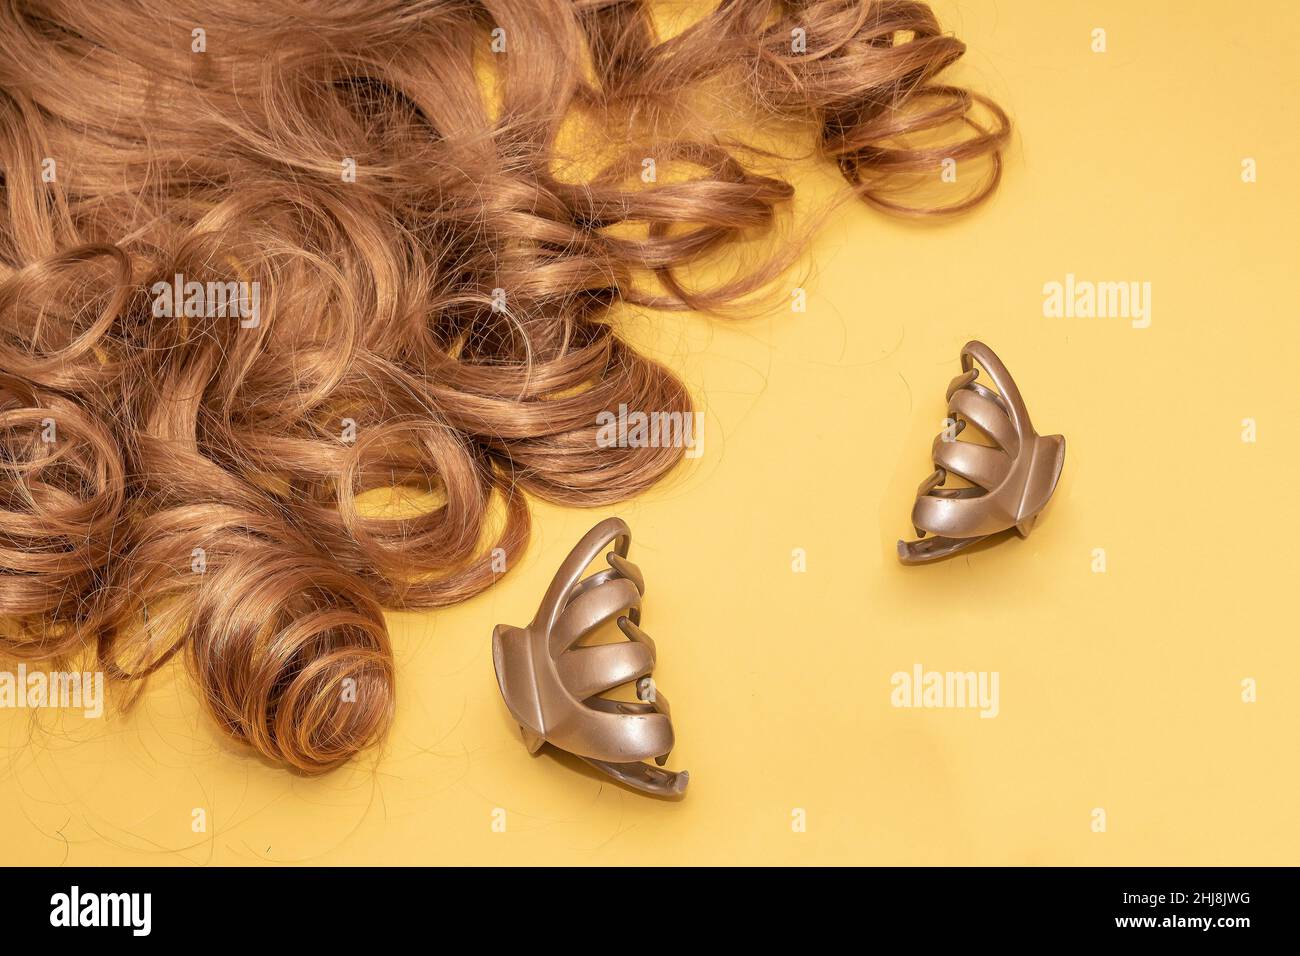 Dark blonde curly hair with plastic hair clips ready for styling Stock Photo